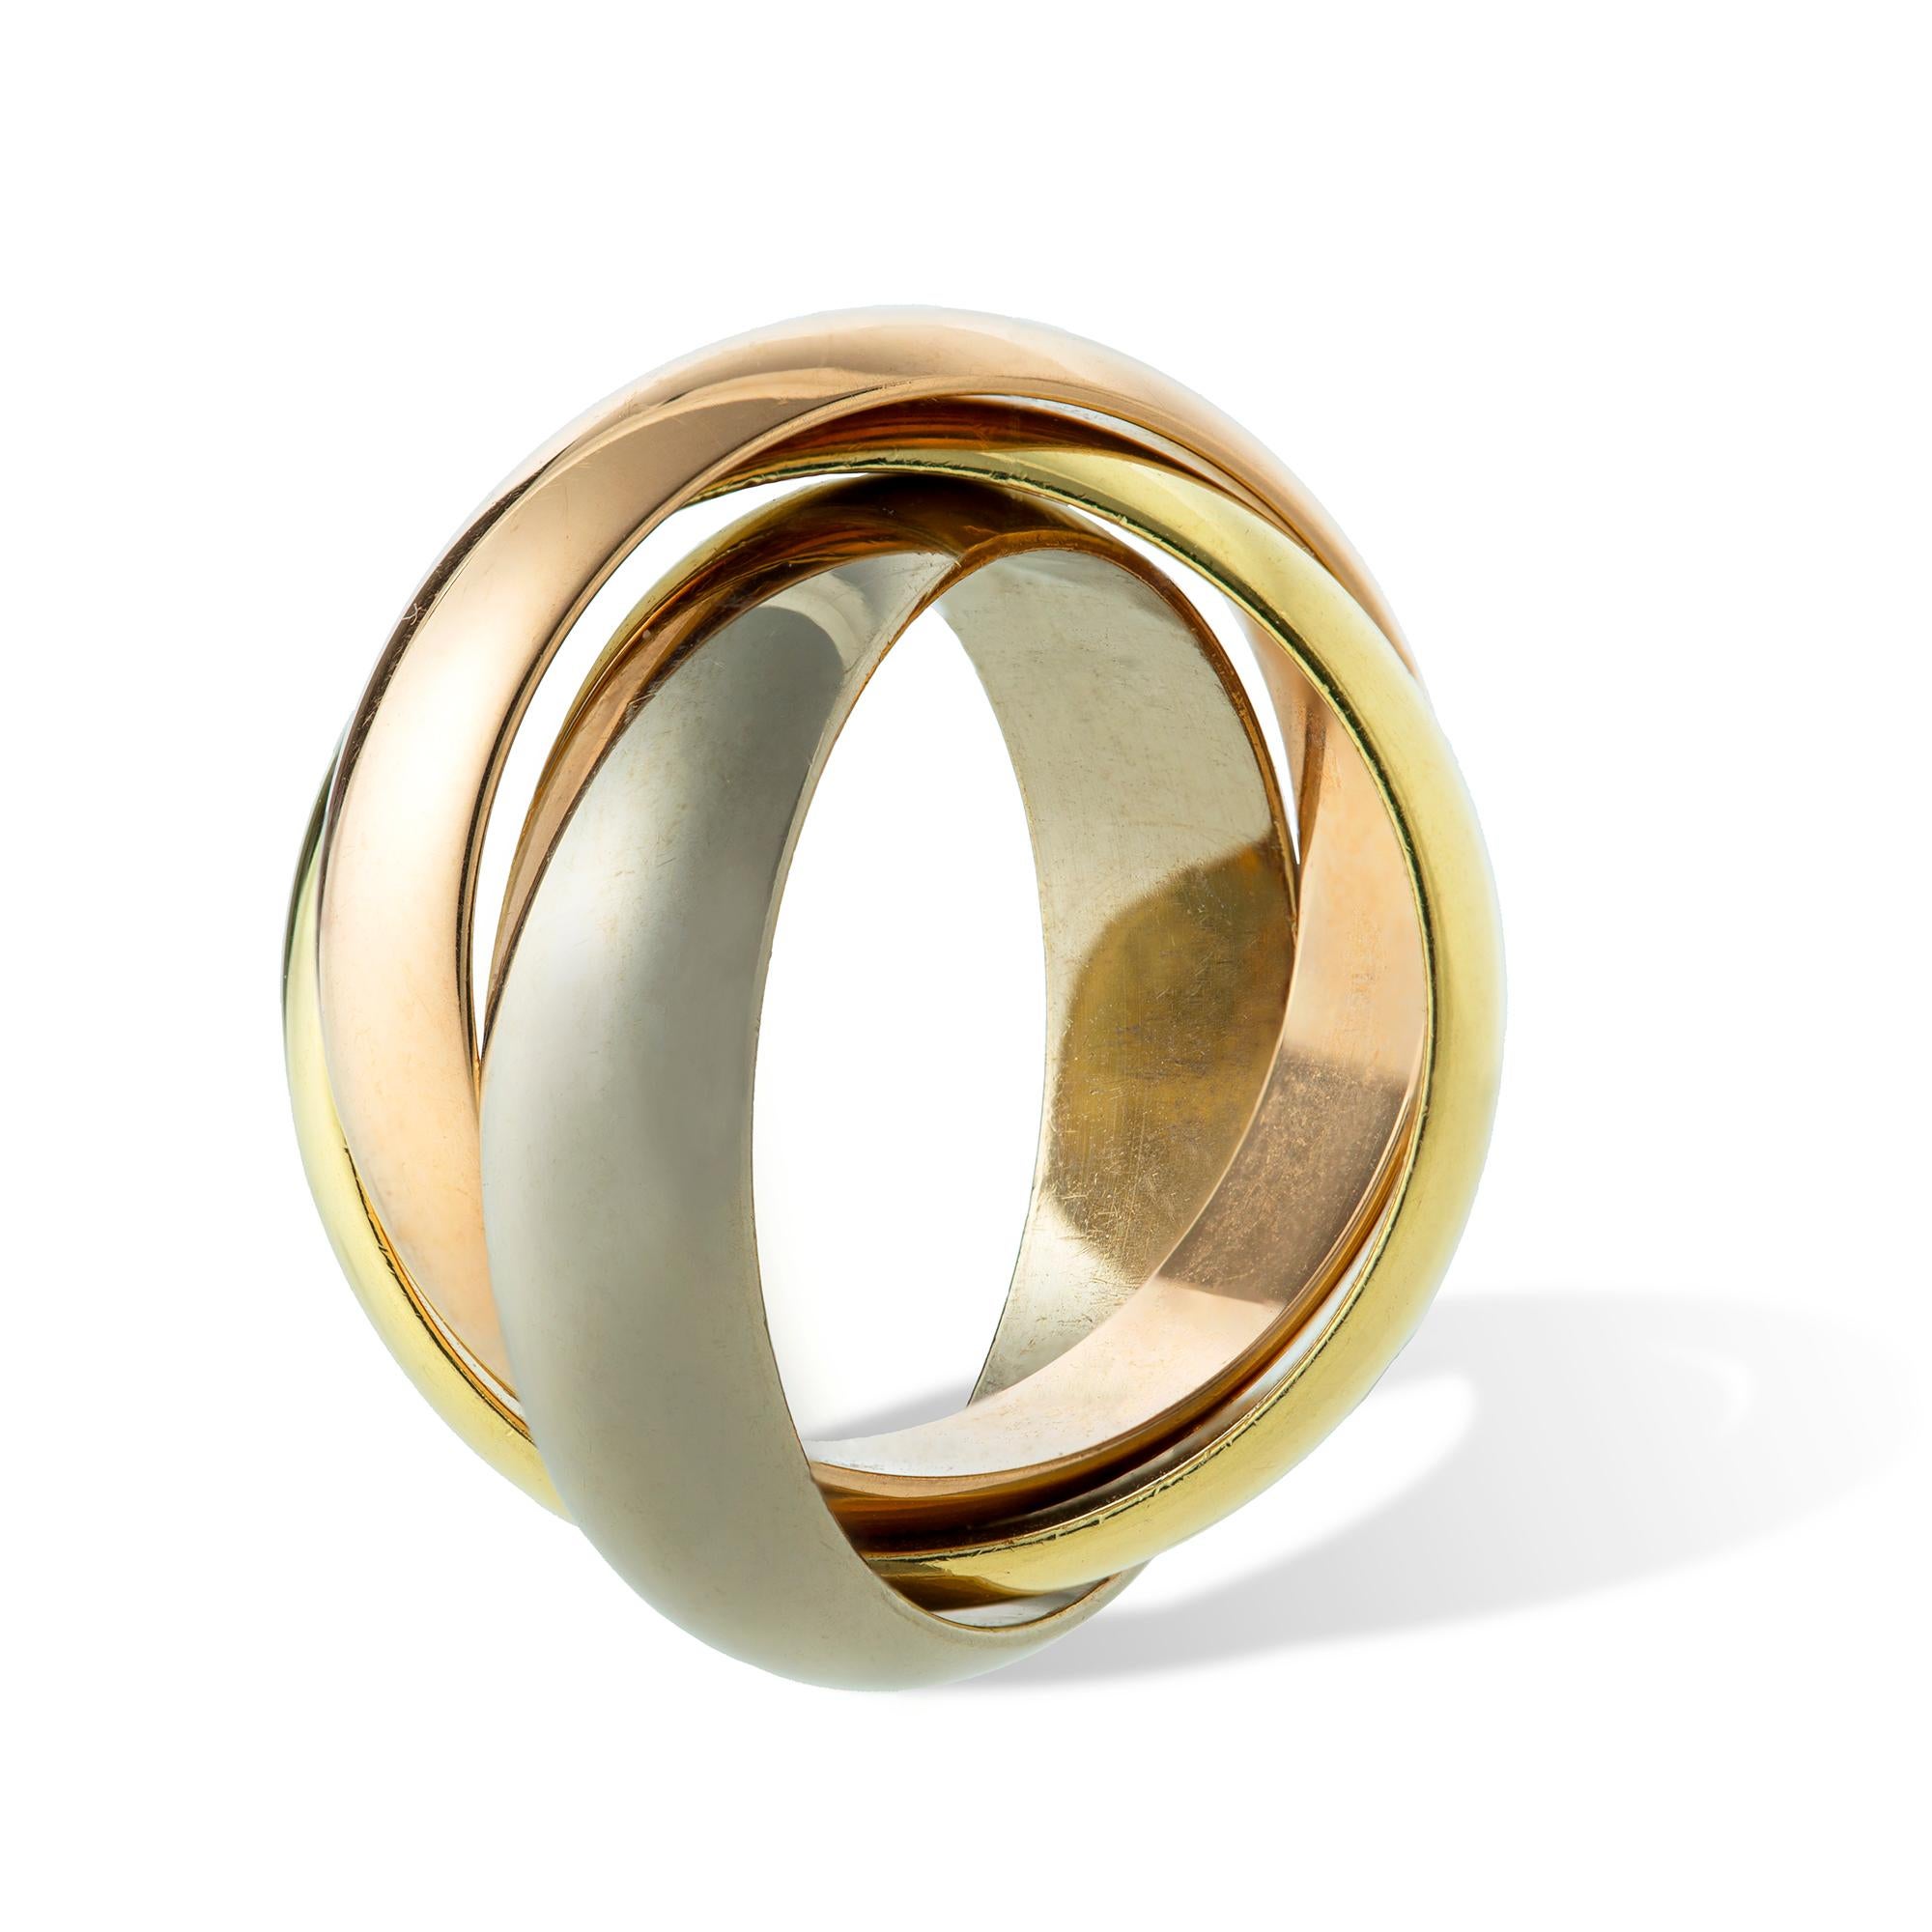 A Cartier Trinity wedding ring, with three bands in white, rose and yellow 18ct gold,  signed Cartier,  bearing the French hallmark for 750 along the convention hallmark,  measuring approximately 1cm in width, gross weight 14.59grams. Finger size